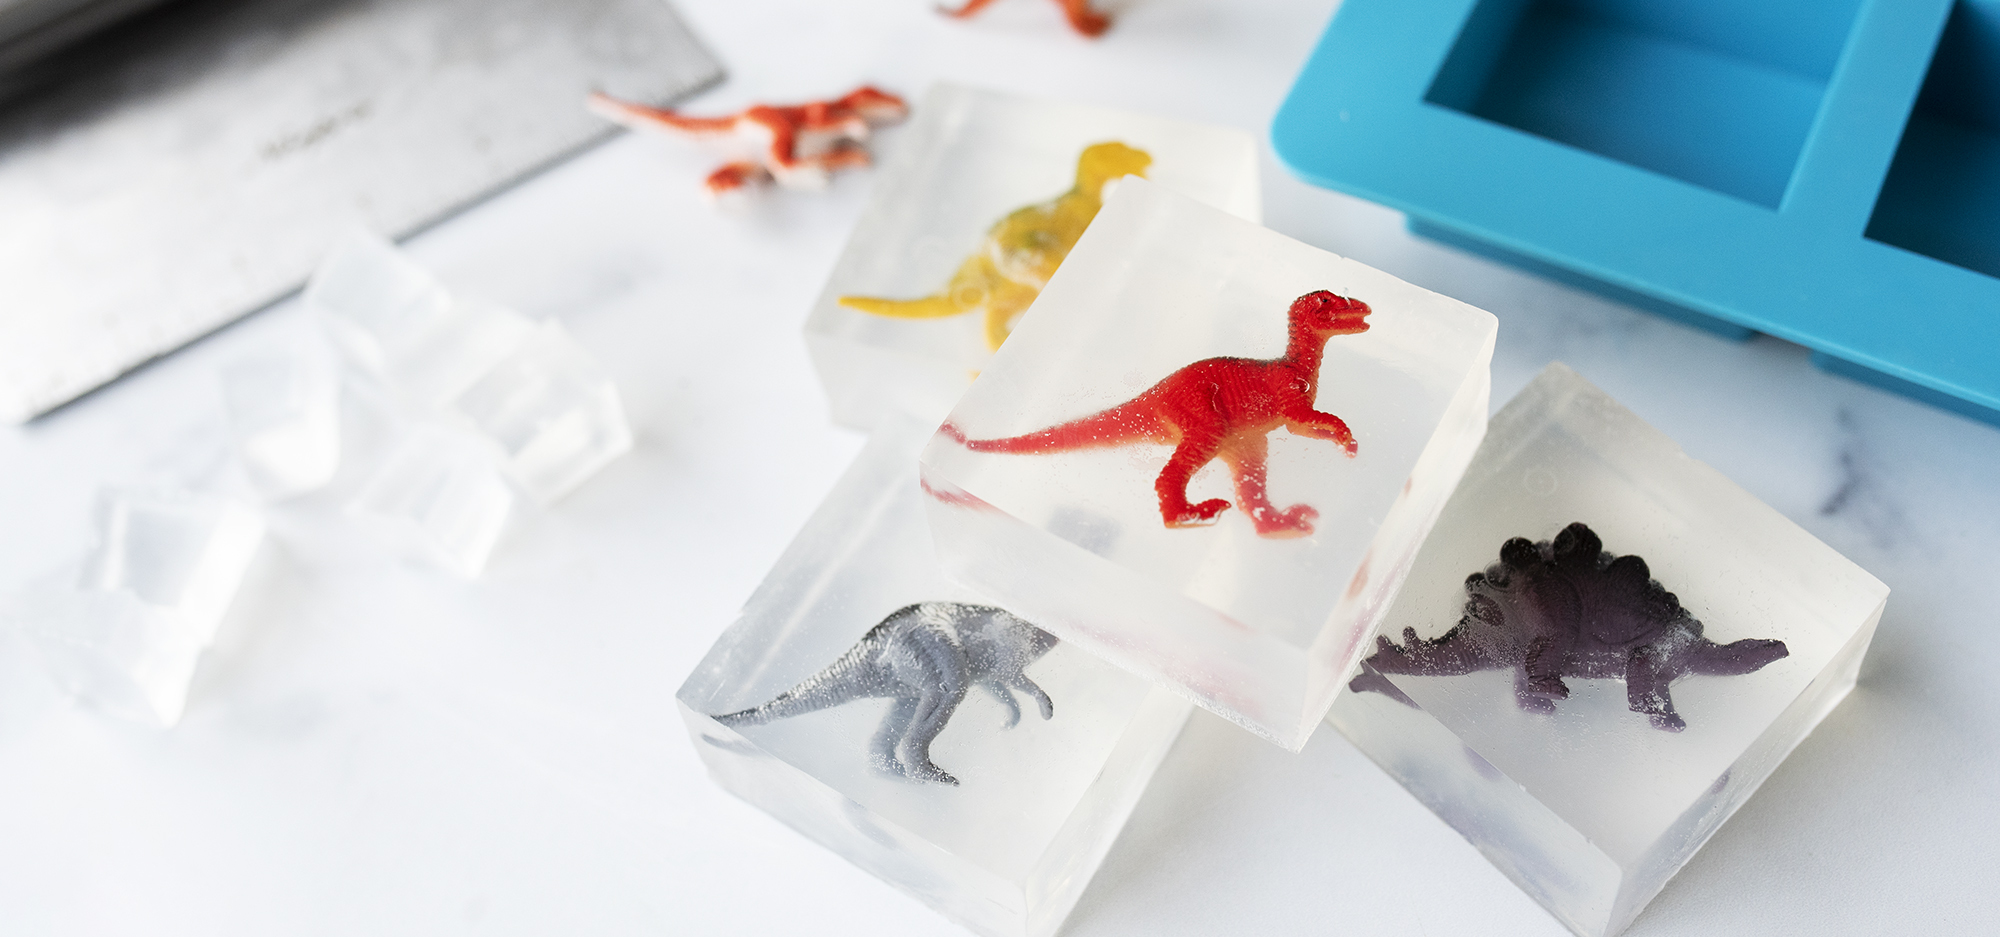 How to Make Dinosaur Hand Soaps - CandleScience